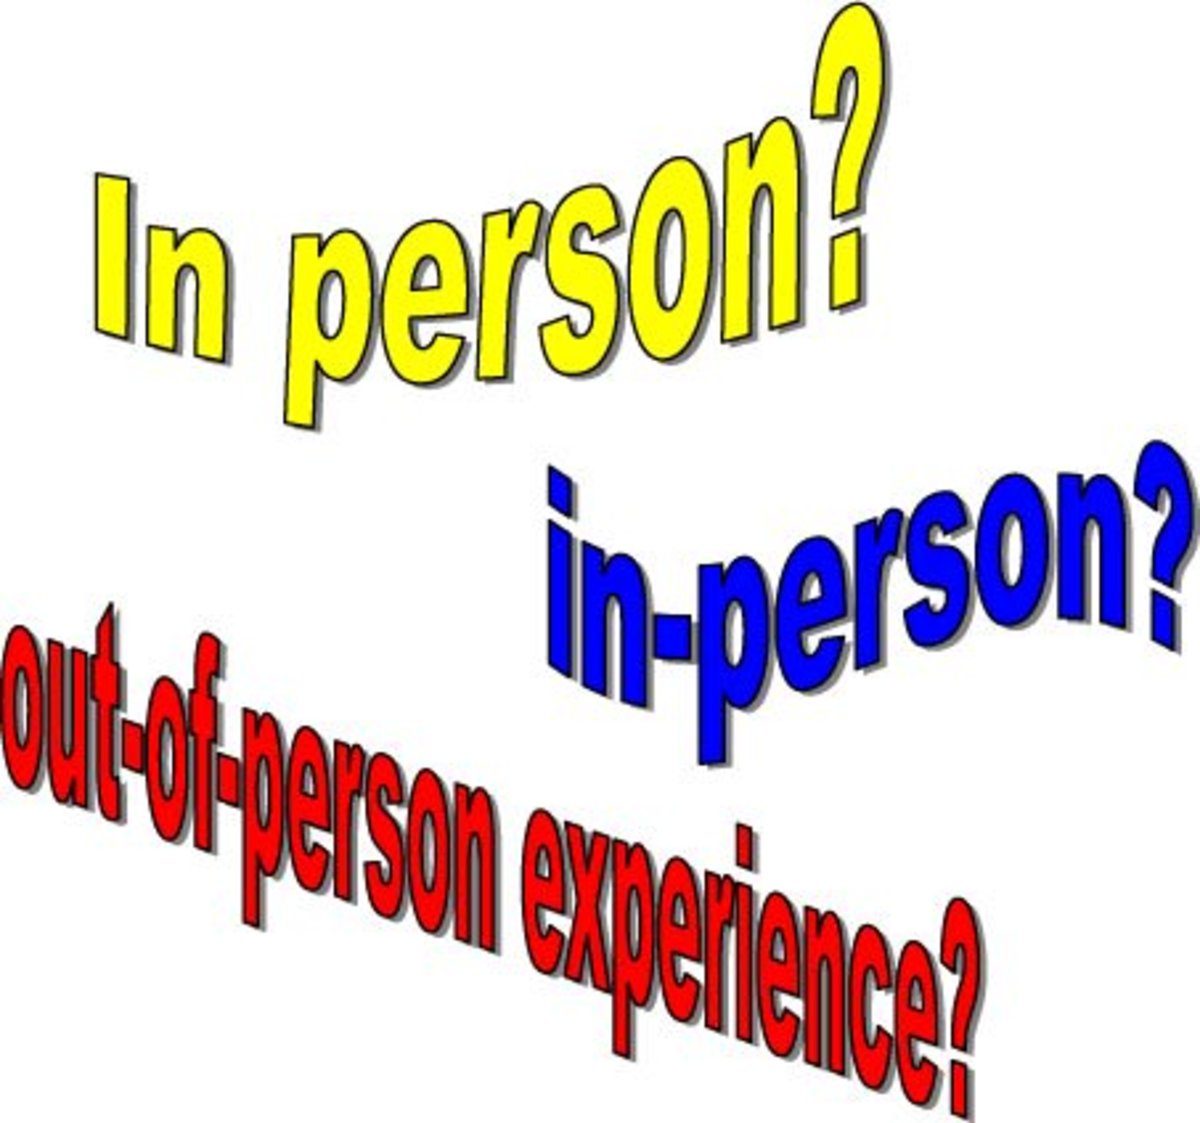 Frustrating English Grammar: Which Is Correct: "in-person" Or "in person"?